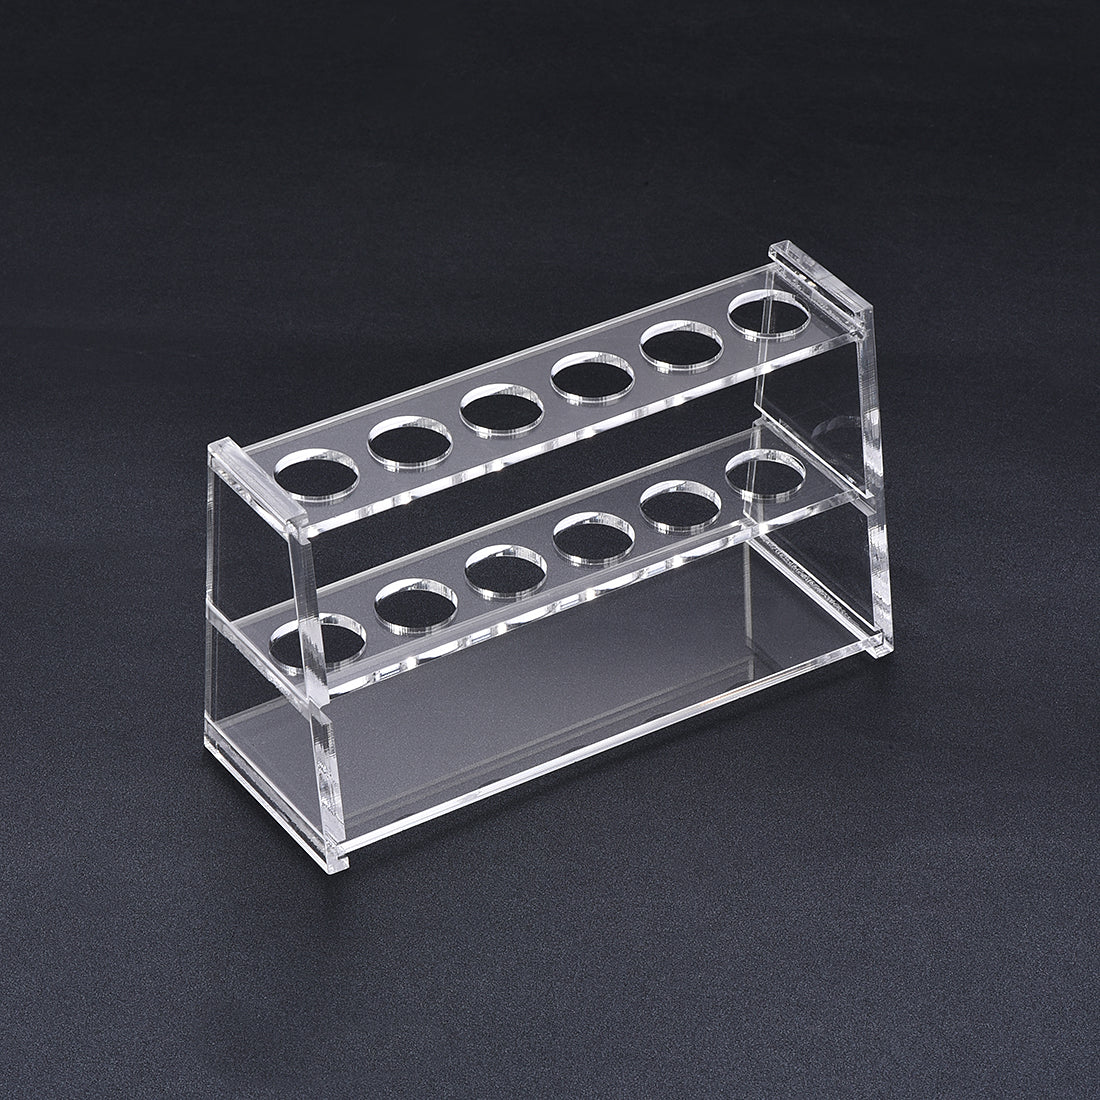 Uxcell Uxcell Acrylic Test Tube Holder Rack 6 Wells for 10ml Centrifuge Tubes Clear 2Pcs